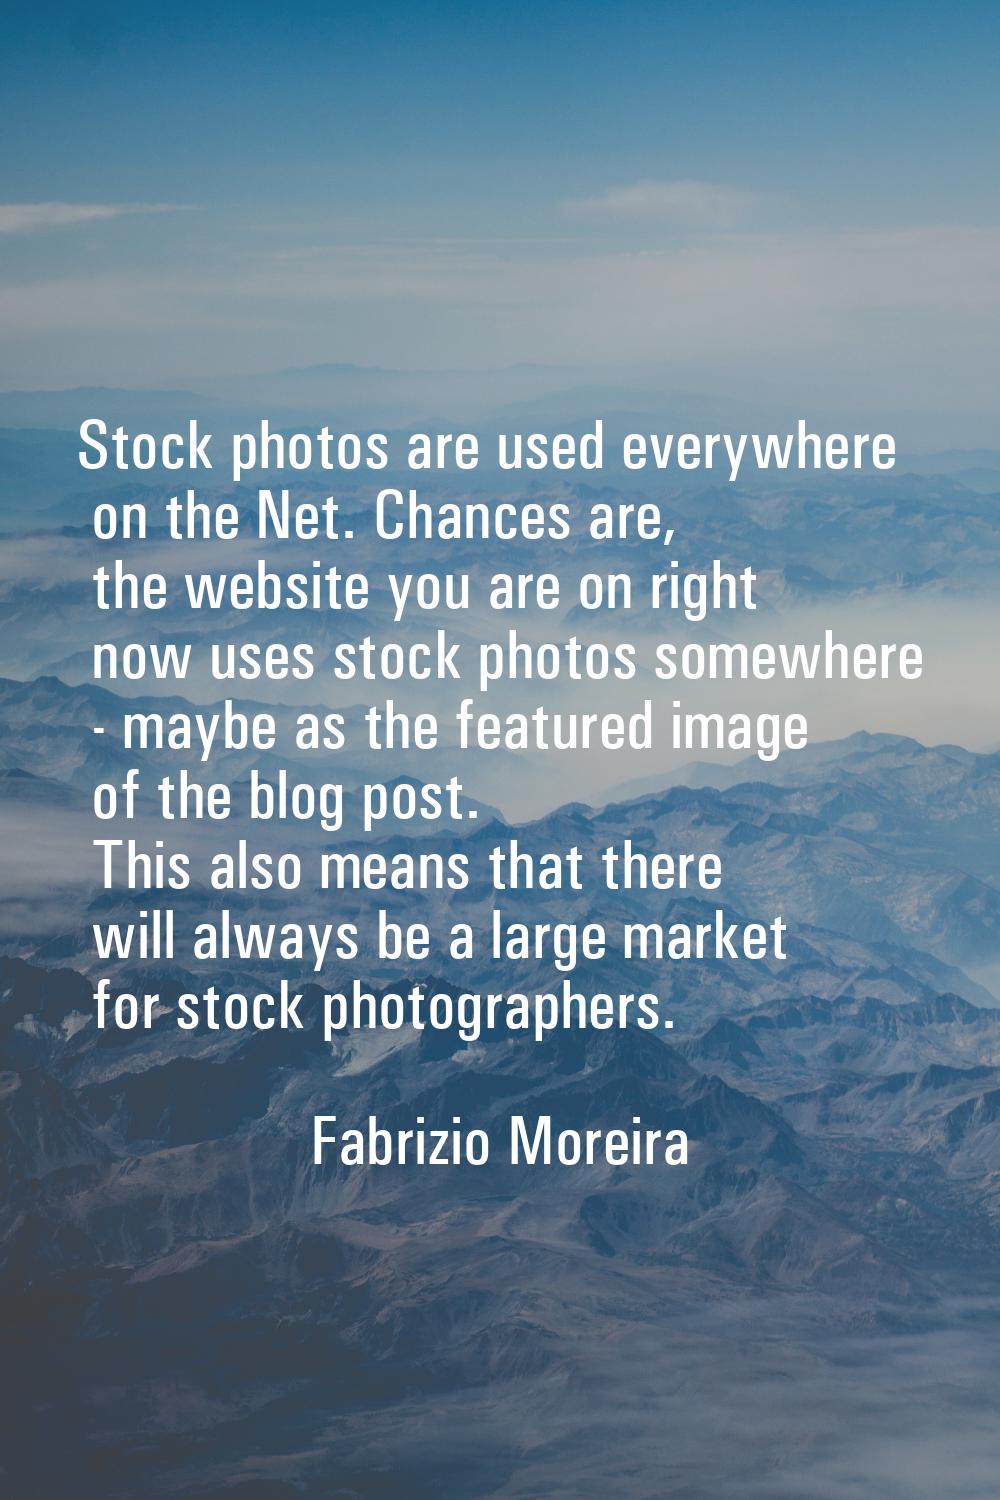 Stock photos are used everywhere on the Net. Chances are, the website you are on right now uses sto